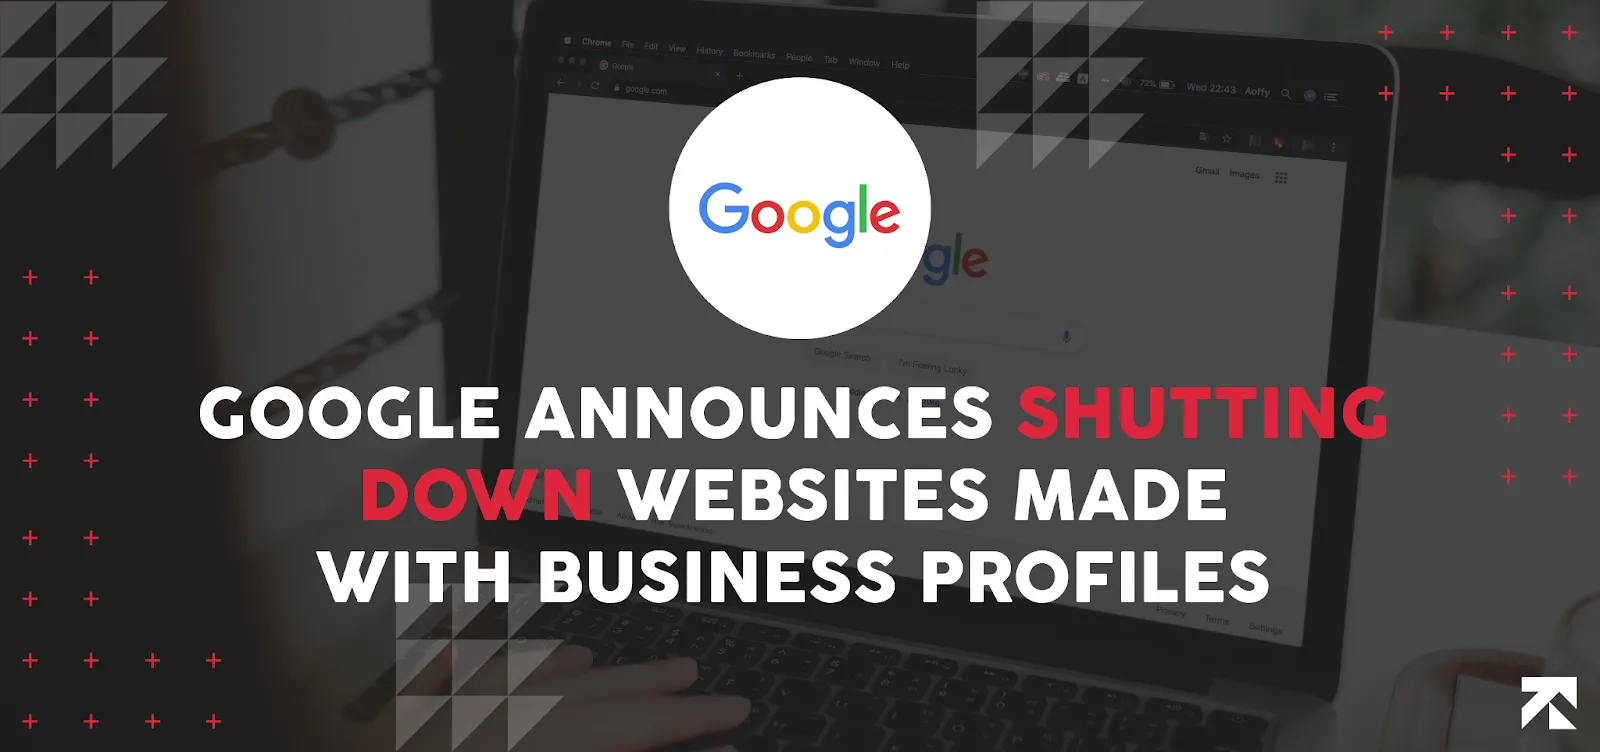 google shutting down websites made with google business profiles